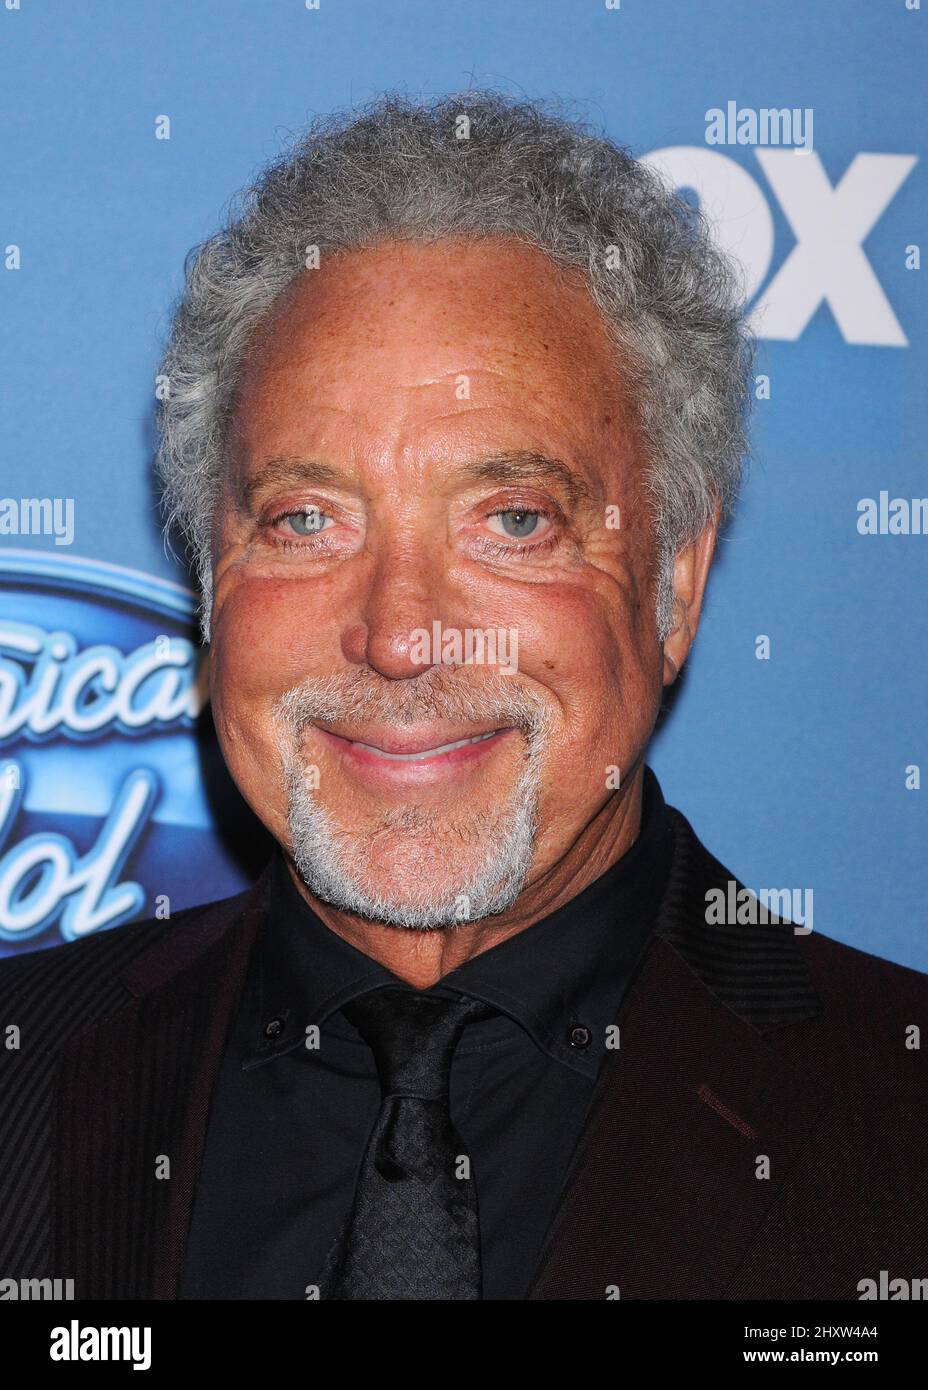 Tom Jones during the American Idol Grand Finale 2011 held at Nokia Theatre L.A. Live, Los Angeles Stock Photo